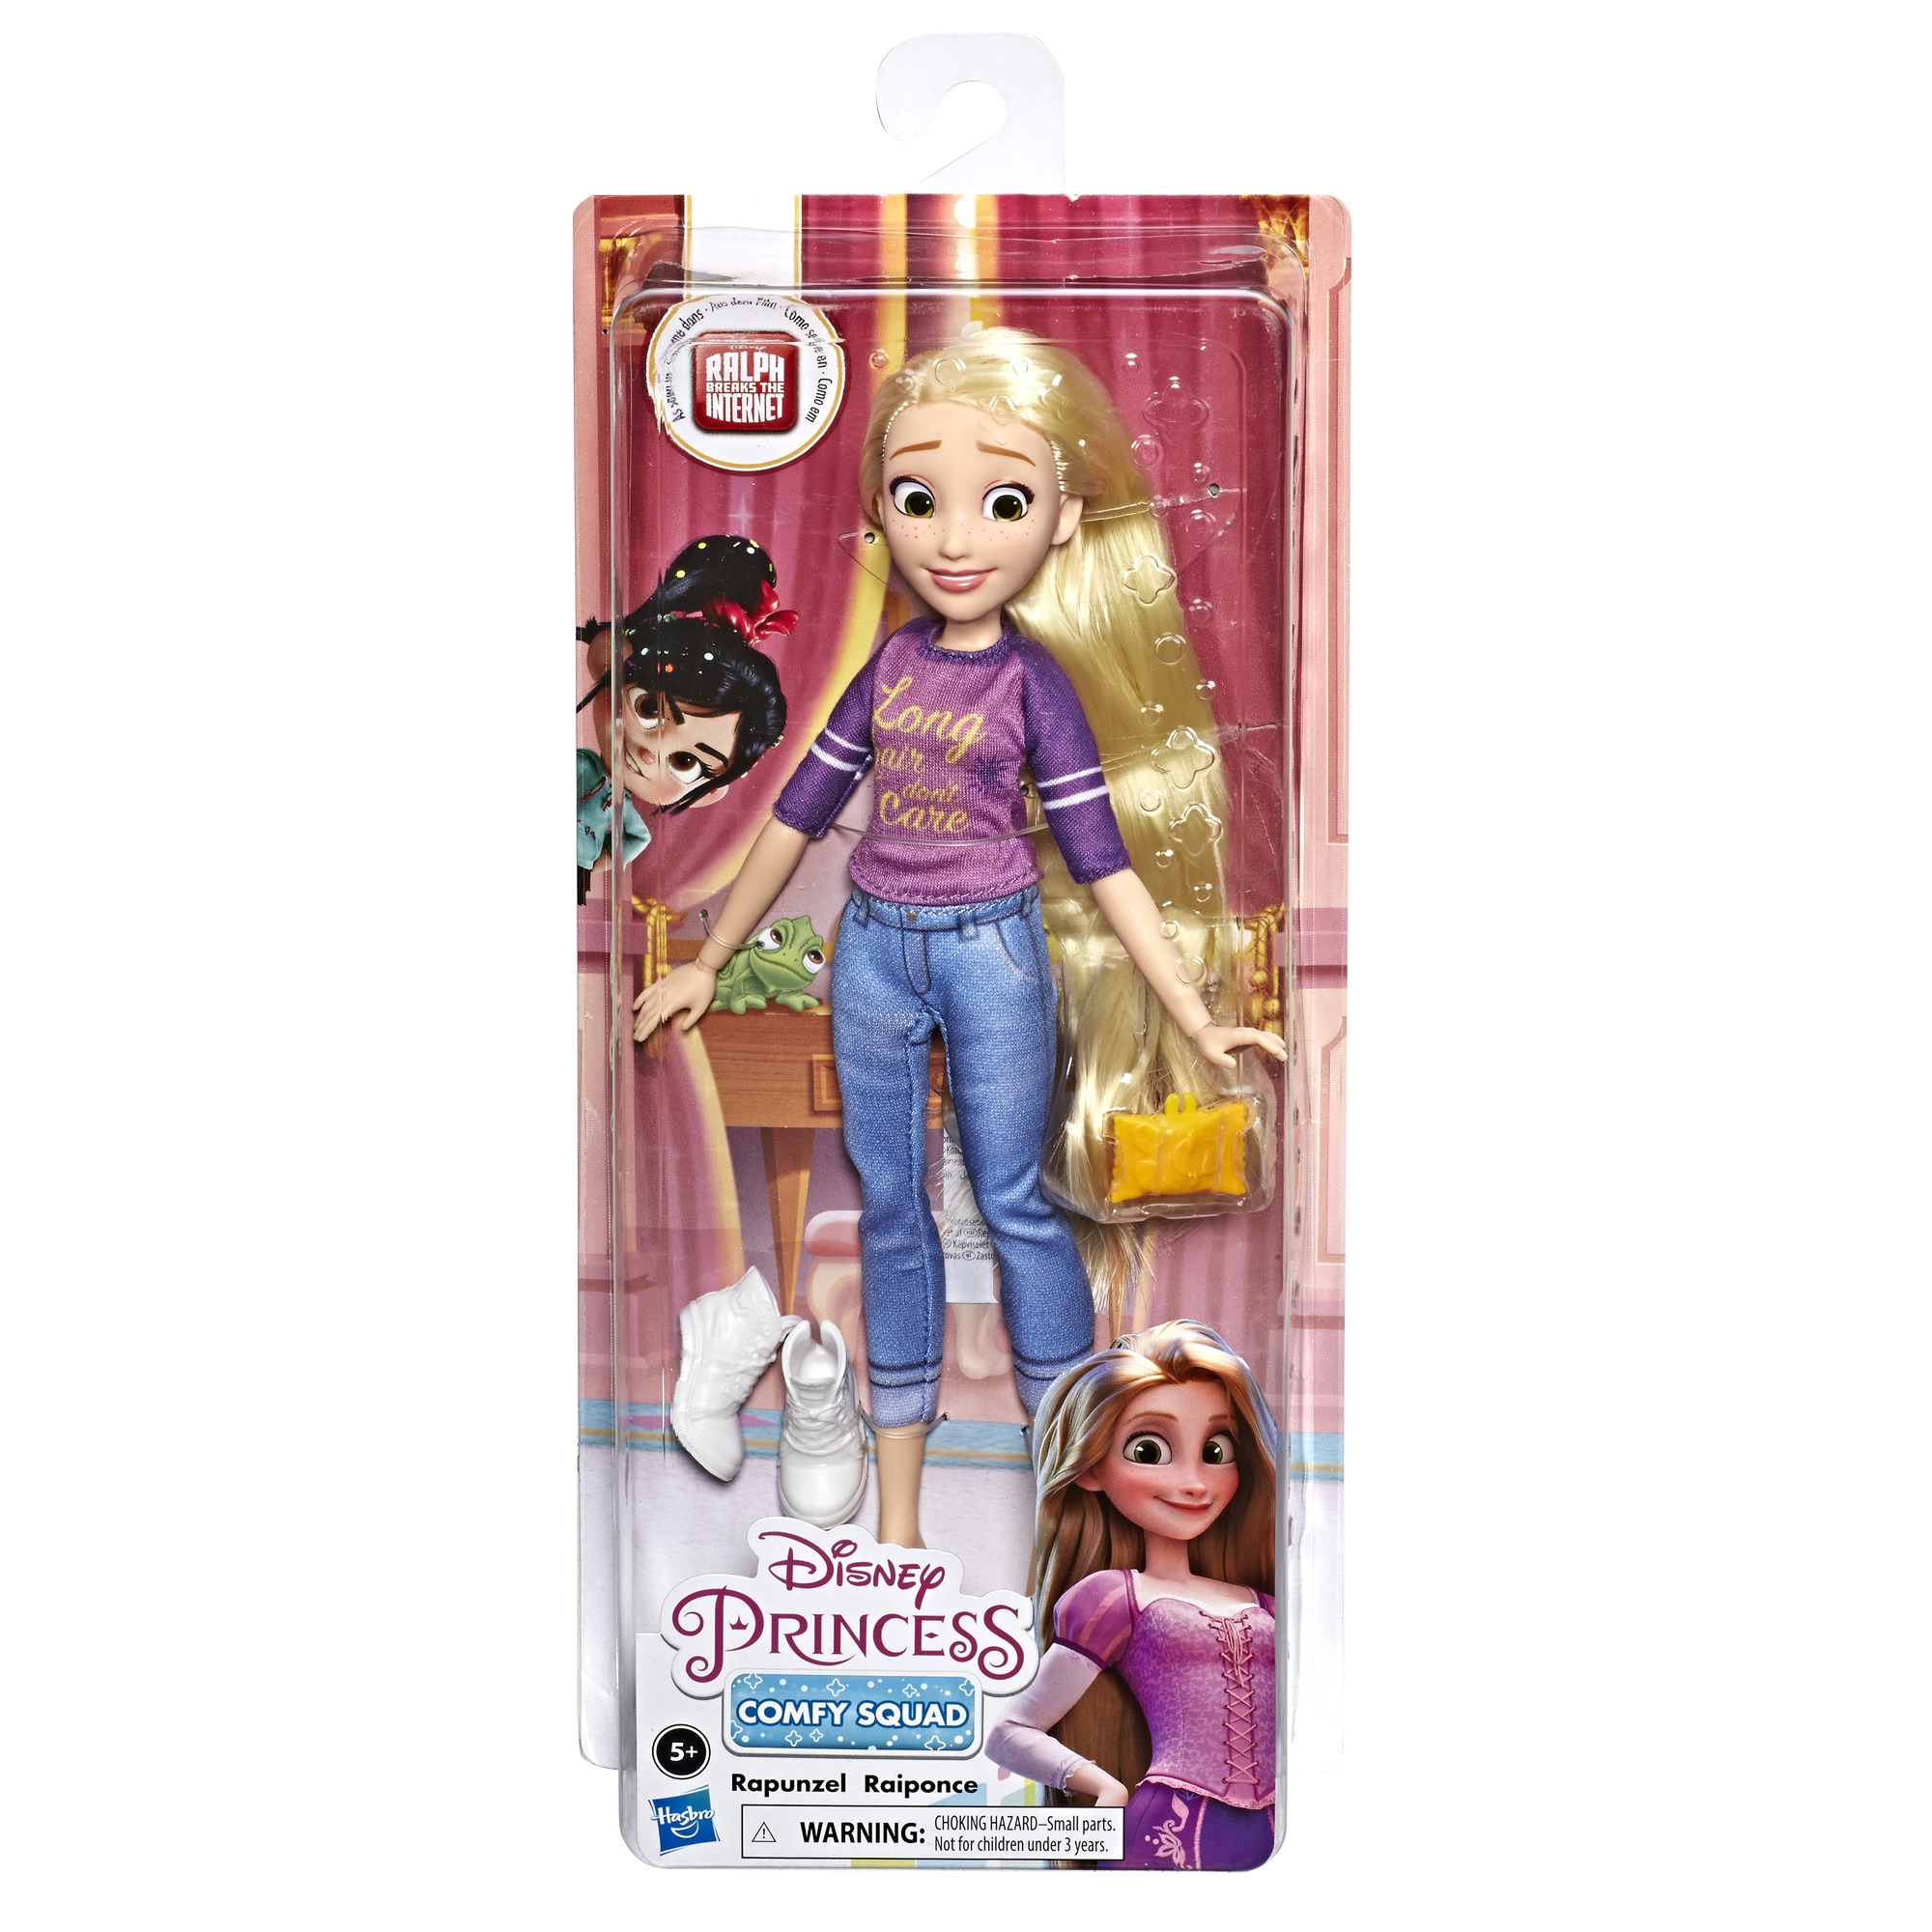 Disney Princess Comfy Squad Rapunzel, Inspired by Ralph Breaks the Internet Movie - image 2 of 7